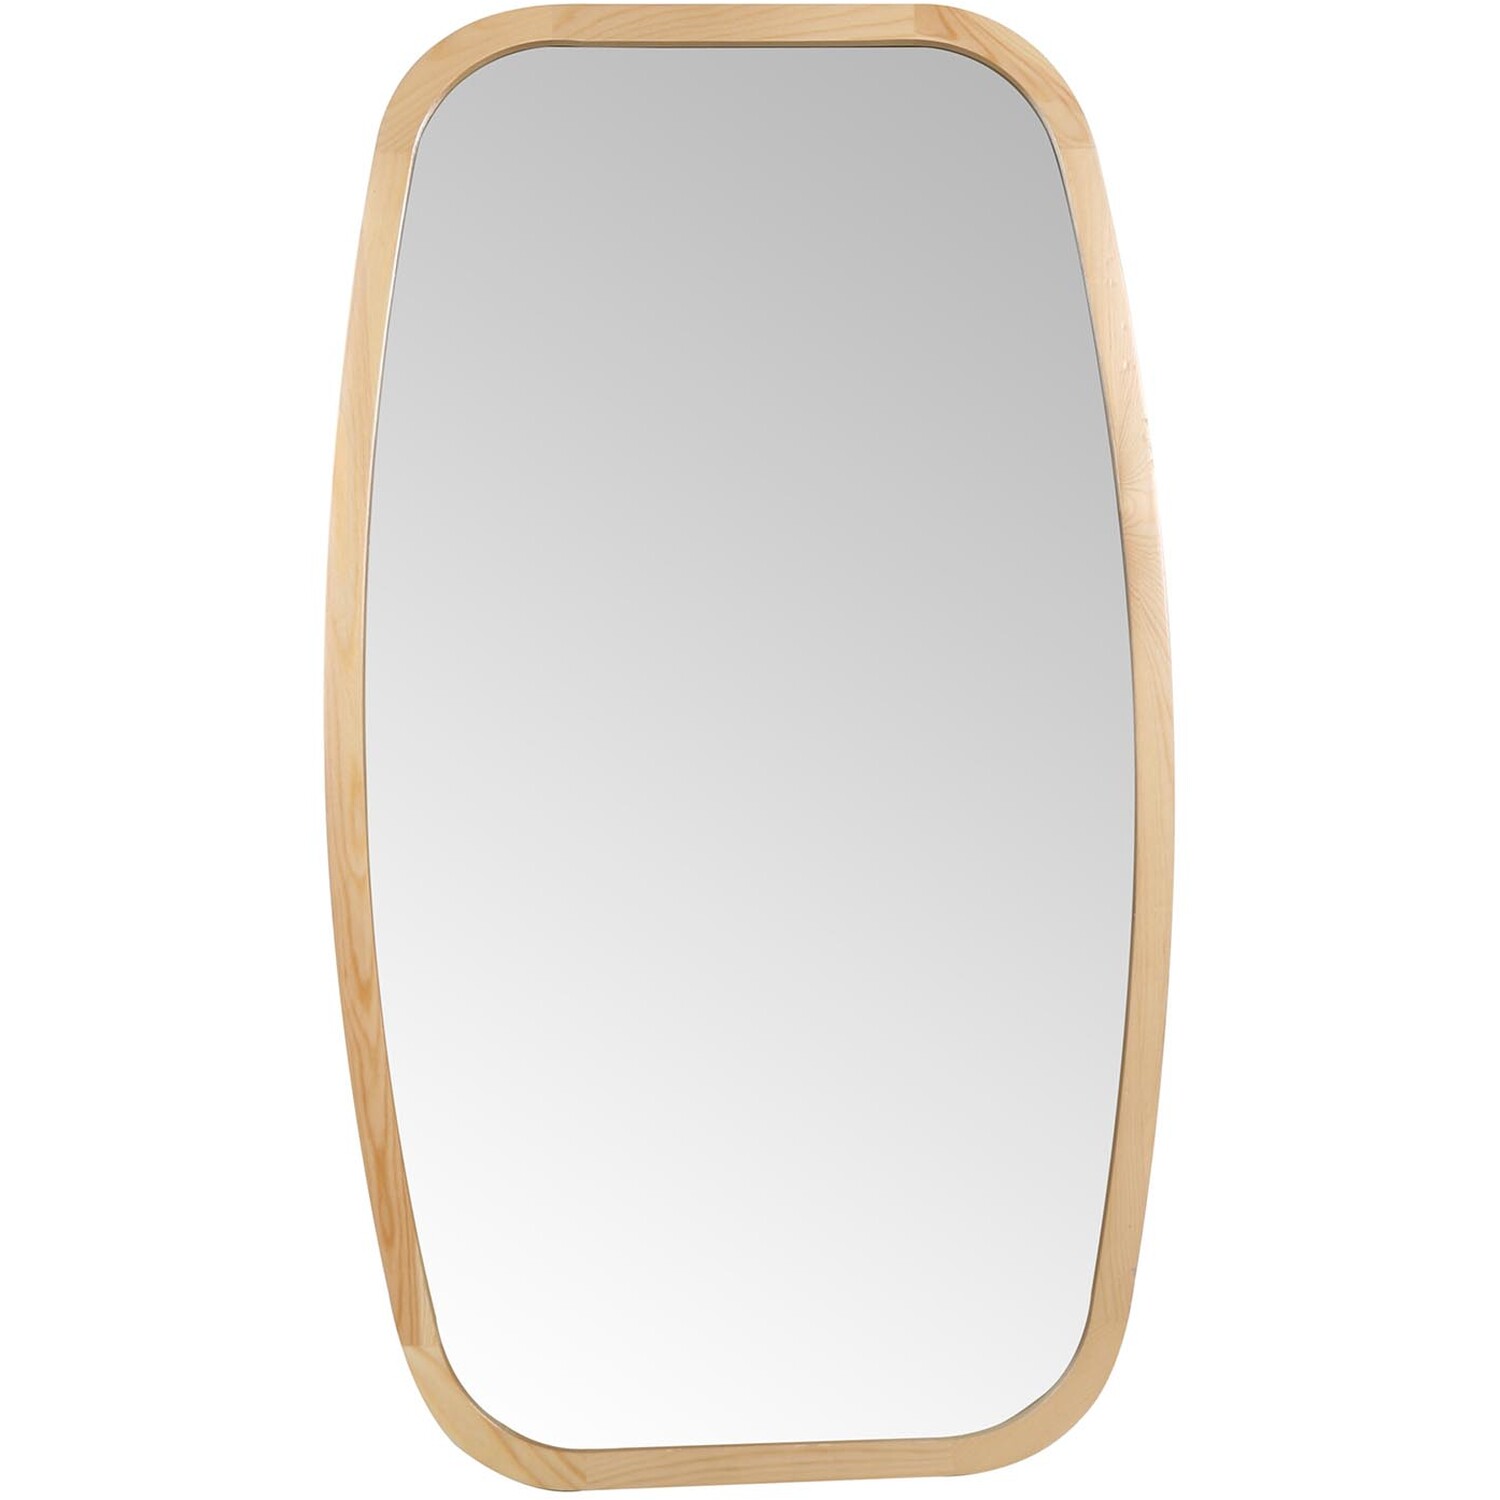 Huxley Curved Wood Effect Wall Mirror Image